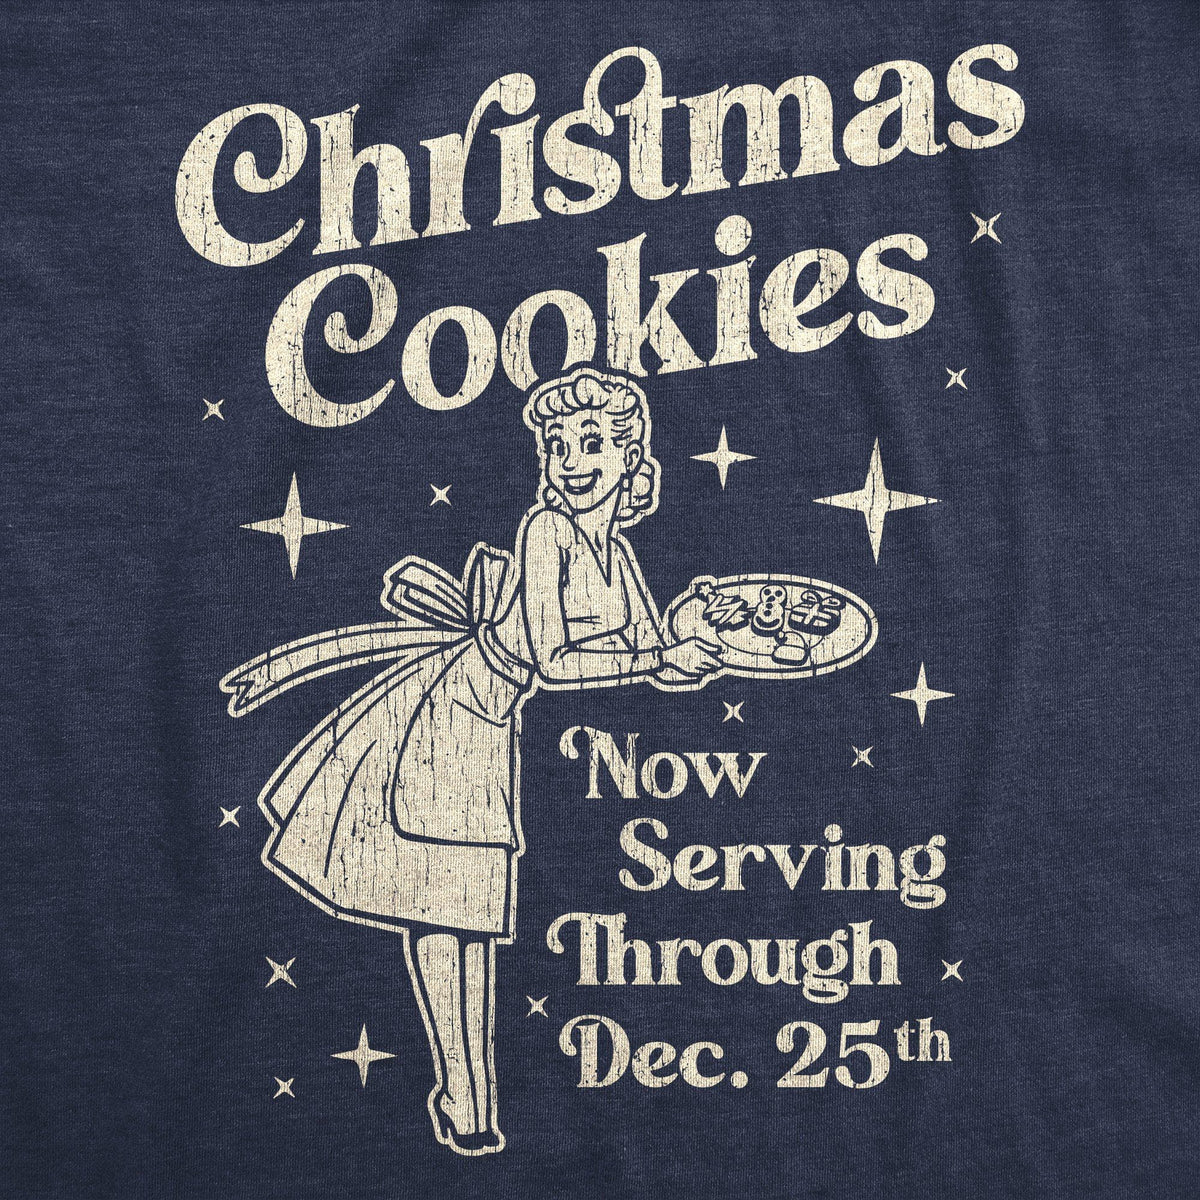 Christmas Cookies Now Serving Through December 25th Men&#39;s Tshirt - Crazy Dog T-Shirts